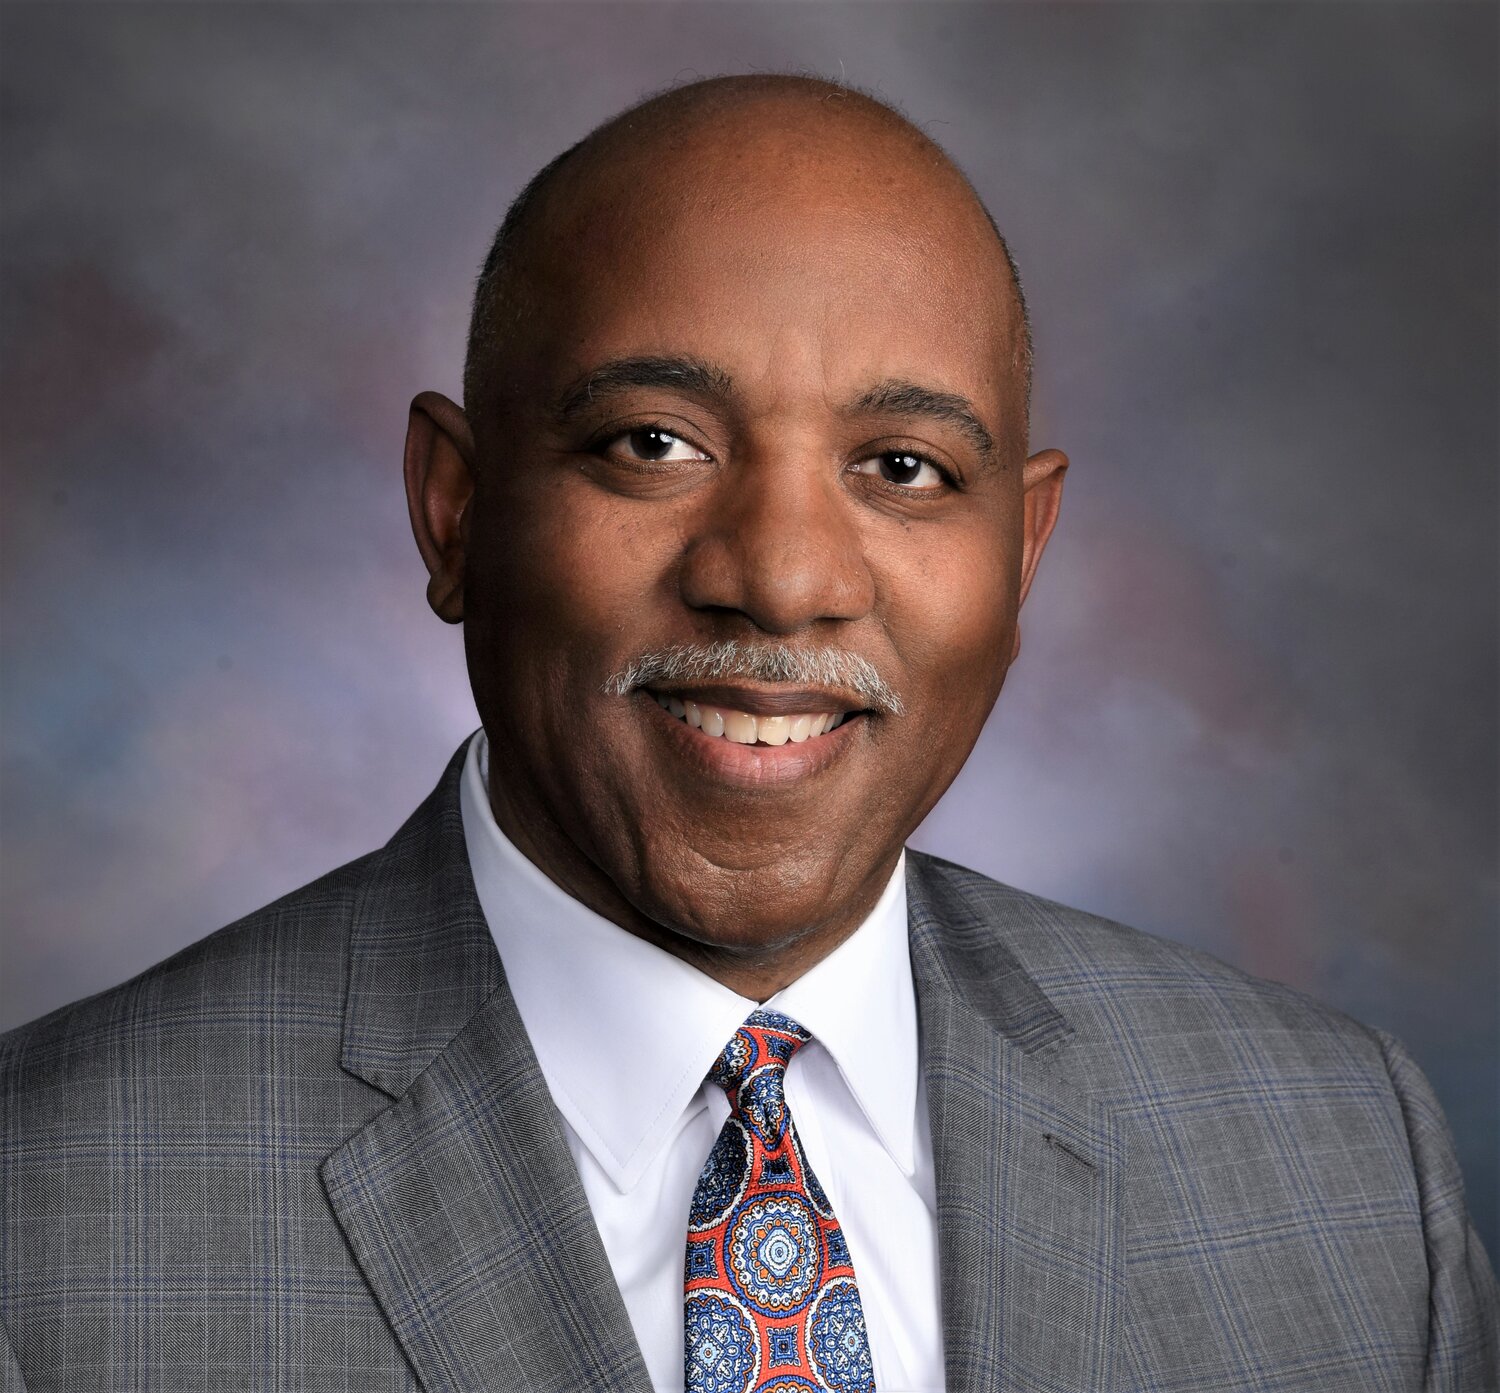 Marvin Connelly Jr., superintendent of Cumberland County Schools, has received the Sandhills Regional Education Consortium's Superintendent of the Year award, according to a news release.